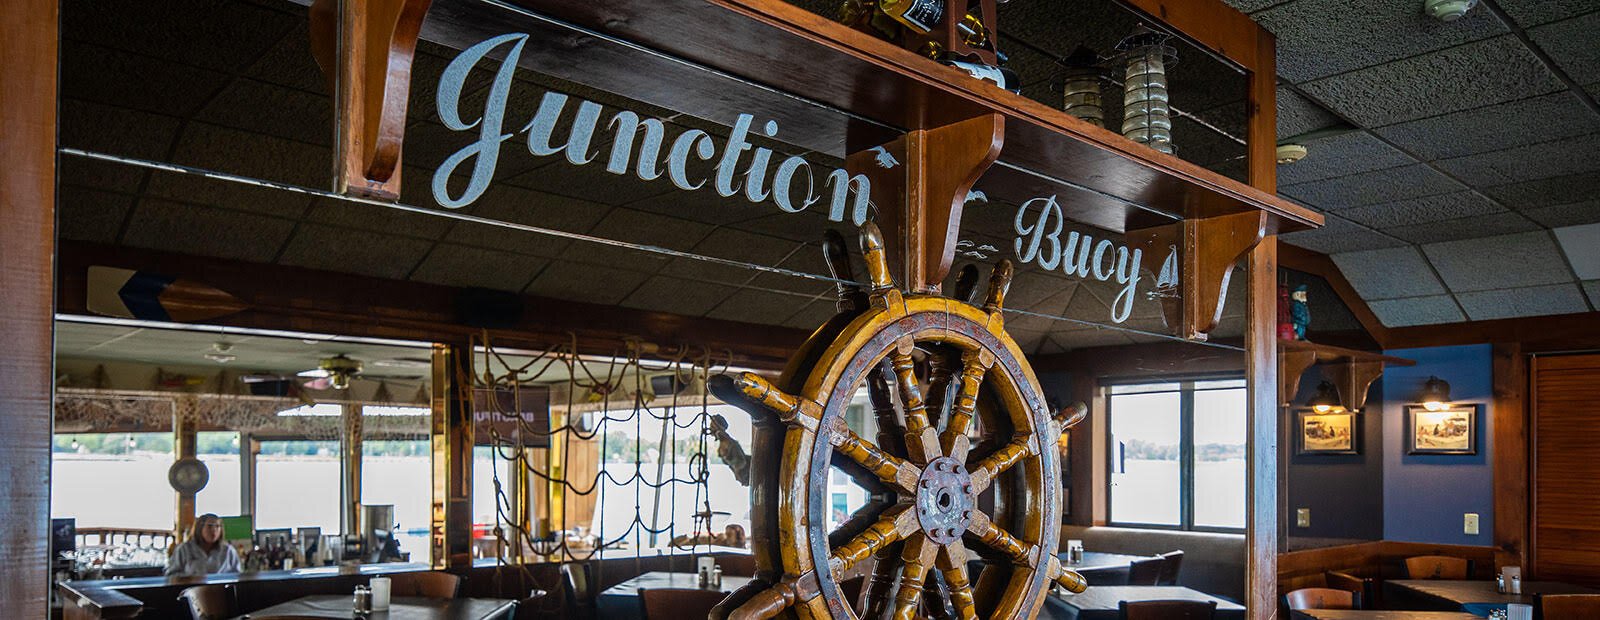 Junction Buoy is a Marysville staple when it comes to dining out.